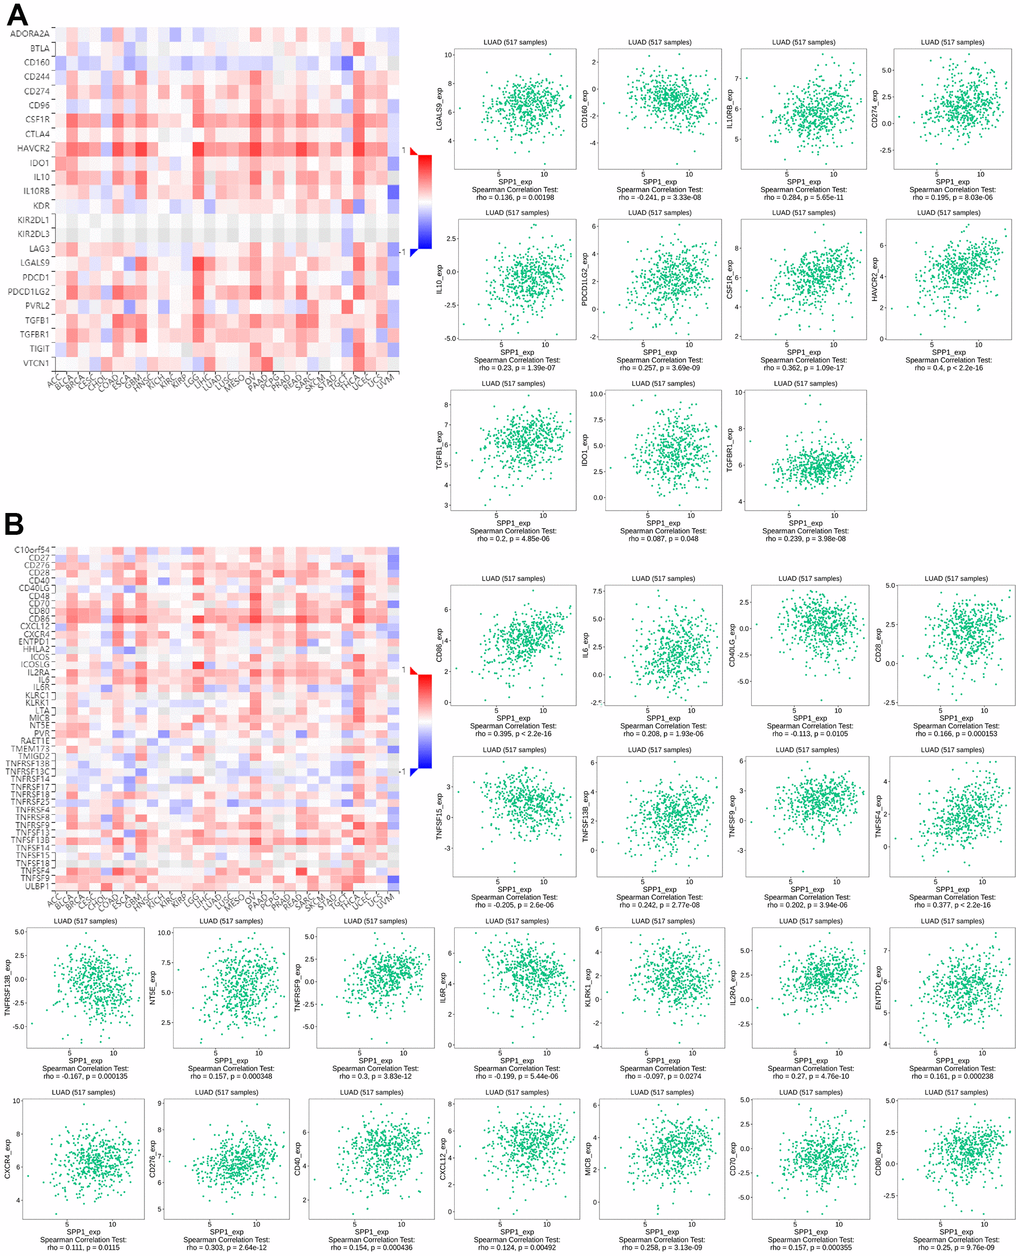 Correlation between the levels of immune infiltration and SPP1 expression. (A) Relationship between 23 immunosuppressants and SPP1 expression in LUAD. (B) Correlation between 46 immune enhancers and SPP1 expression in LUAD.